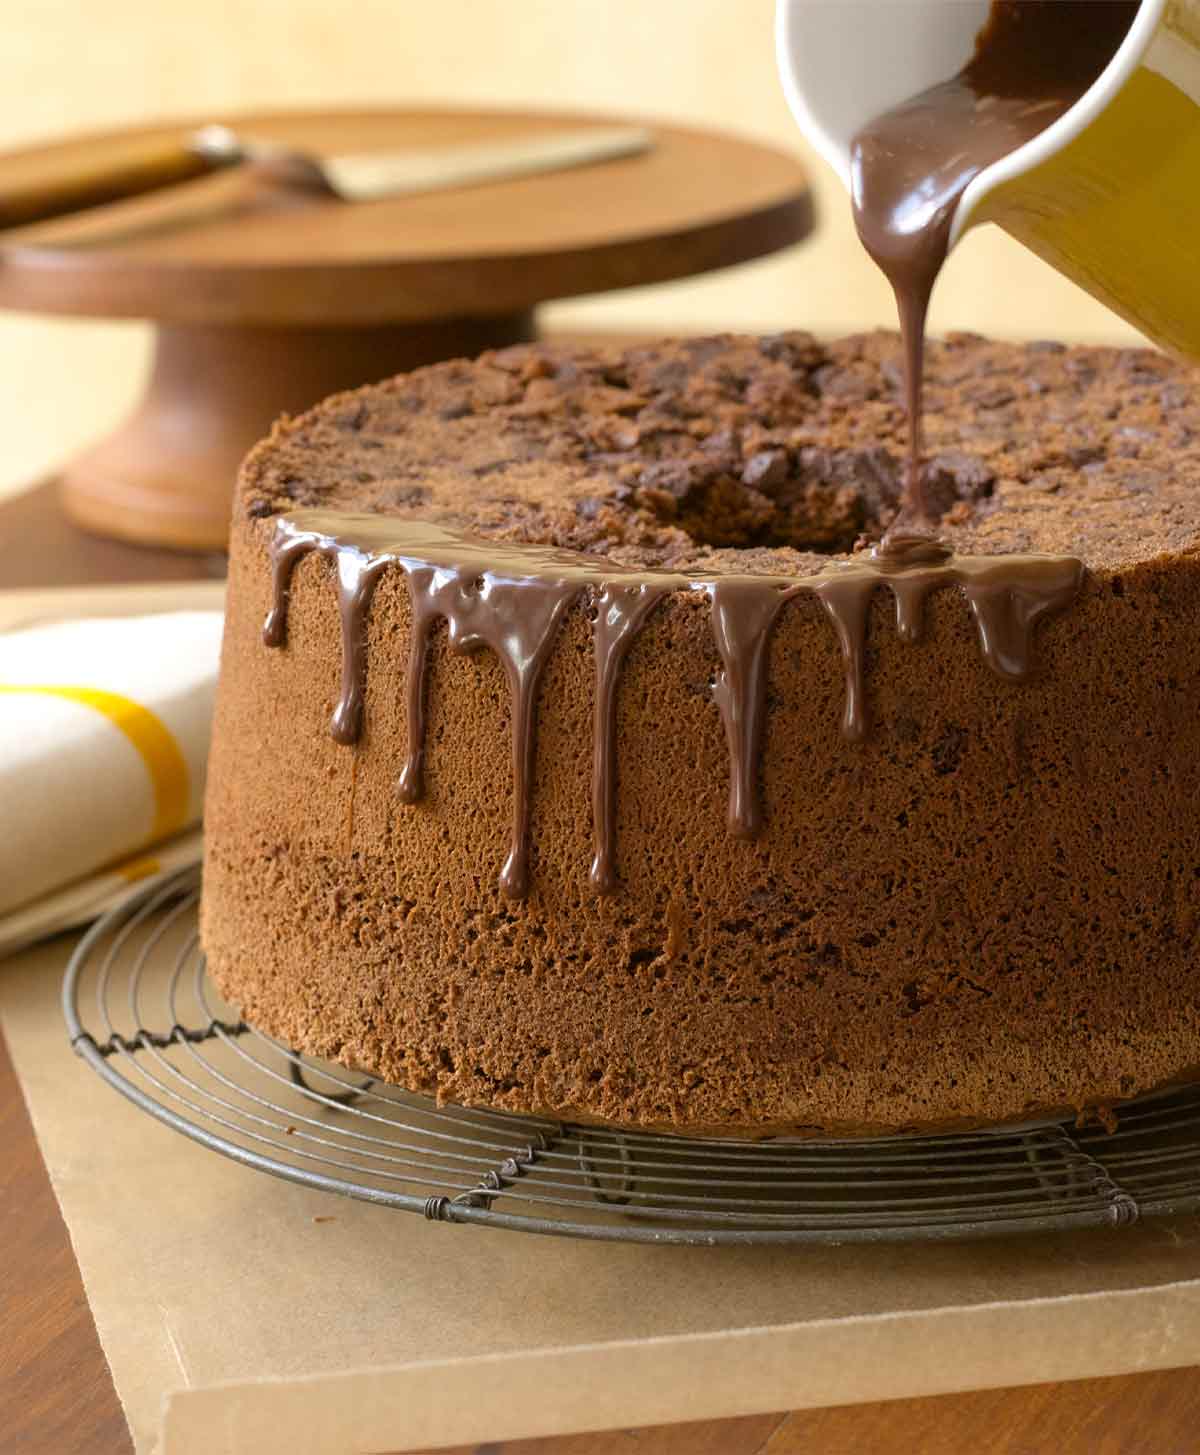 A Chinese five-spice chocolate chiffon cake on a wire rack, being drizzled with chocolate glaze from a yellow pitcher.